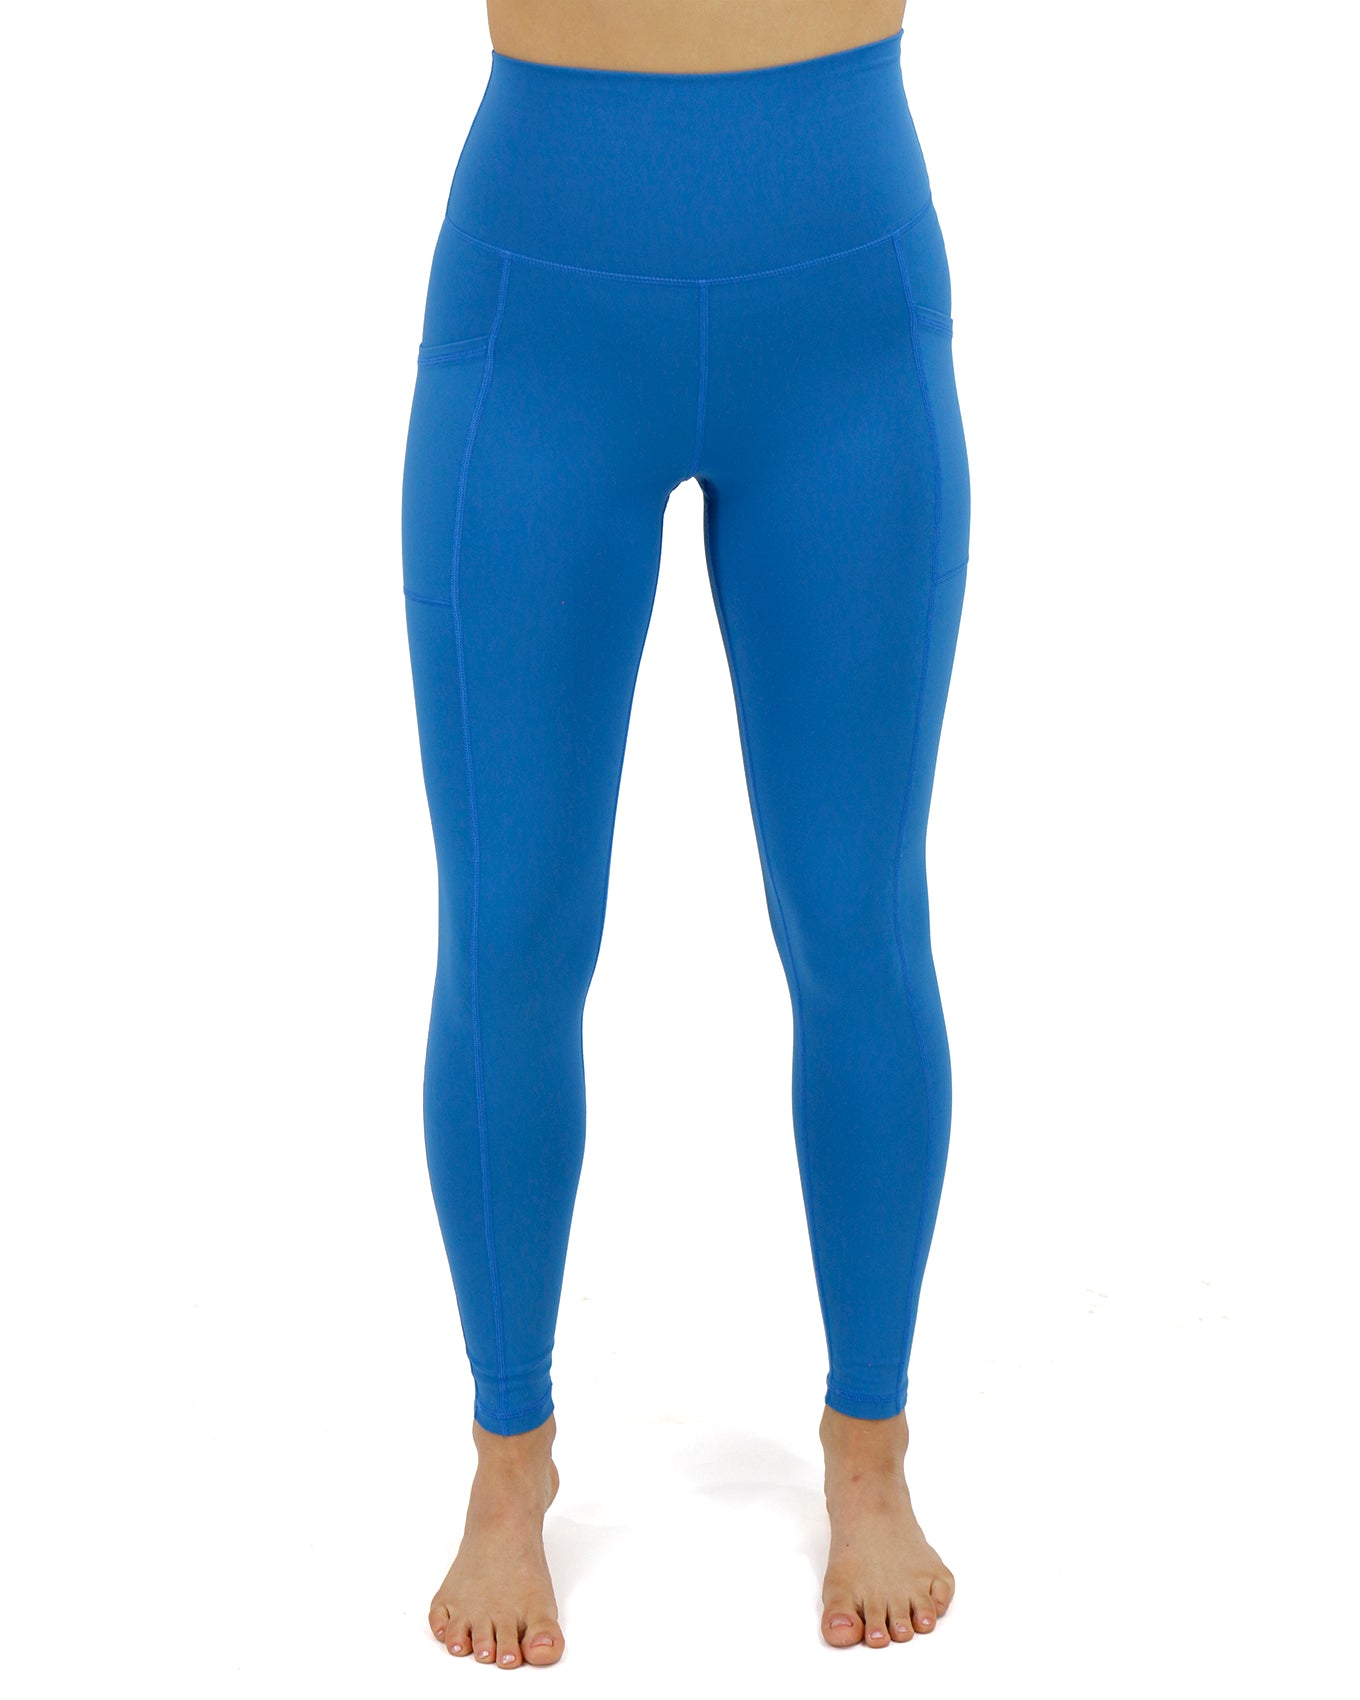 Buy the Womens Blue Flat Front Elastic Waist Activewear Compression  Leggings Size M